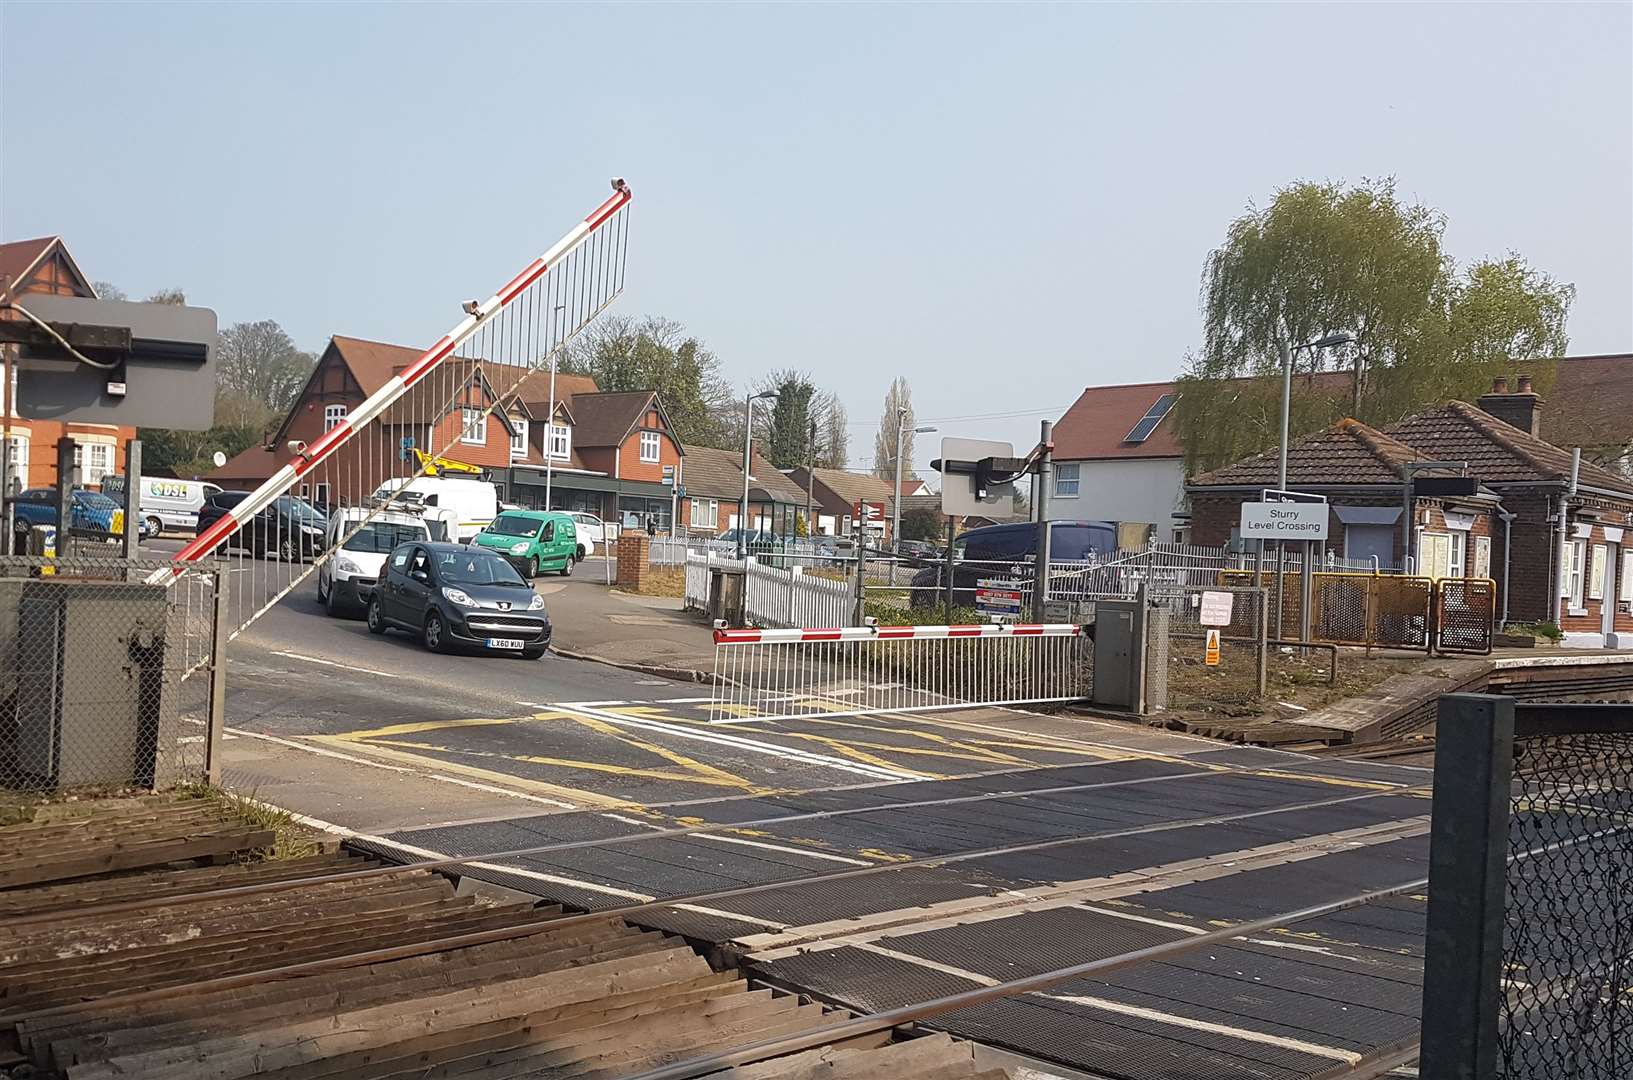 The link road should prevent the regular snarl up of traffic due to the level crossing at Sturry